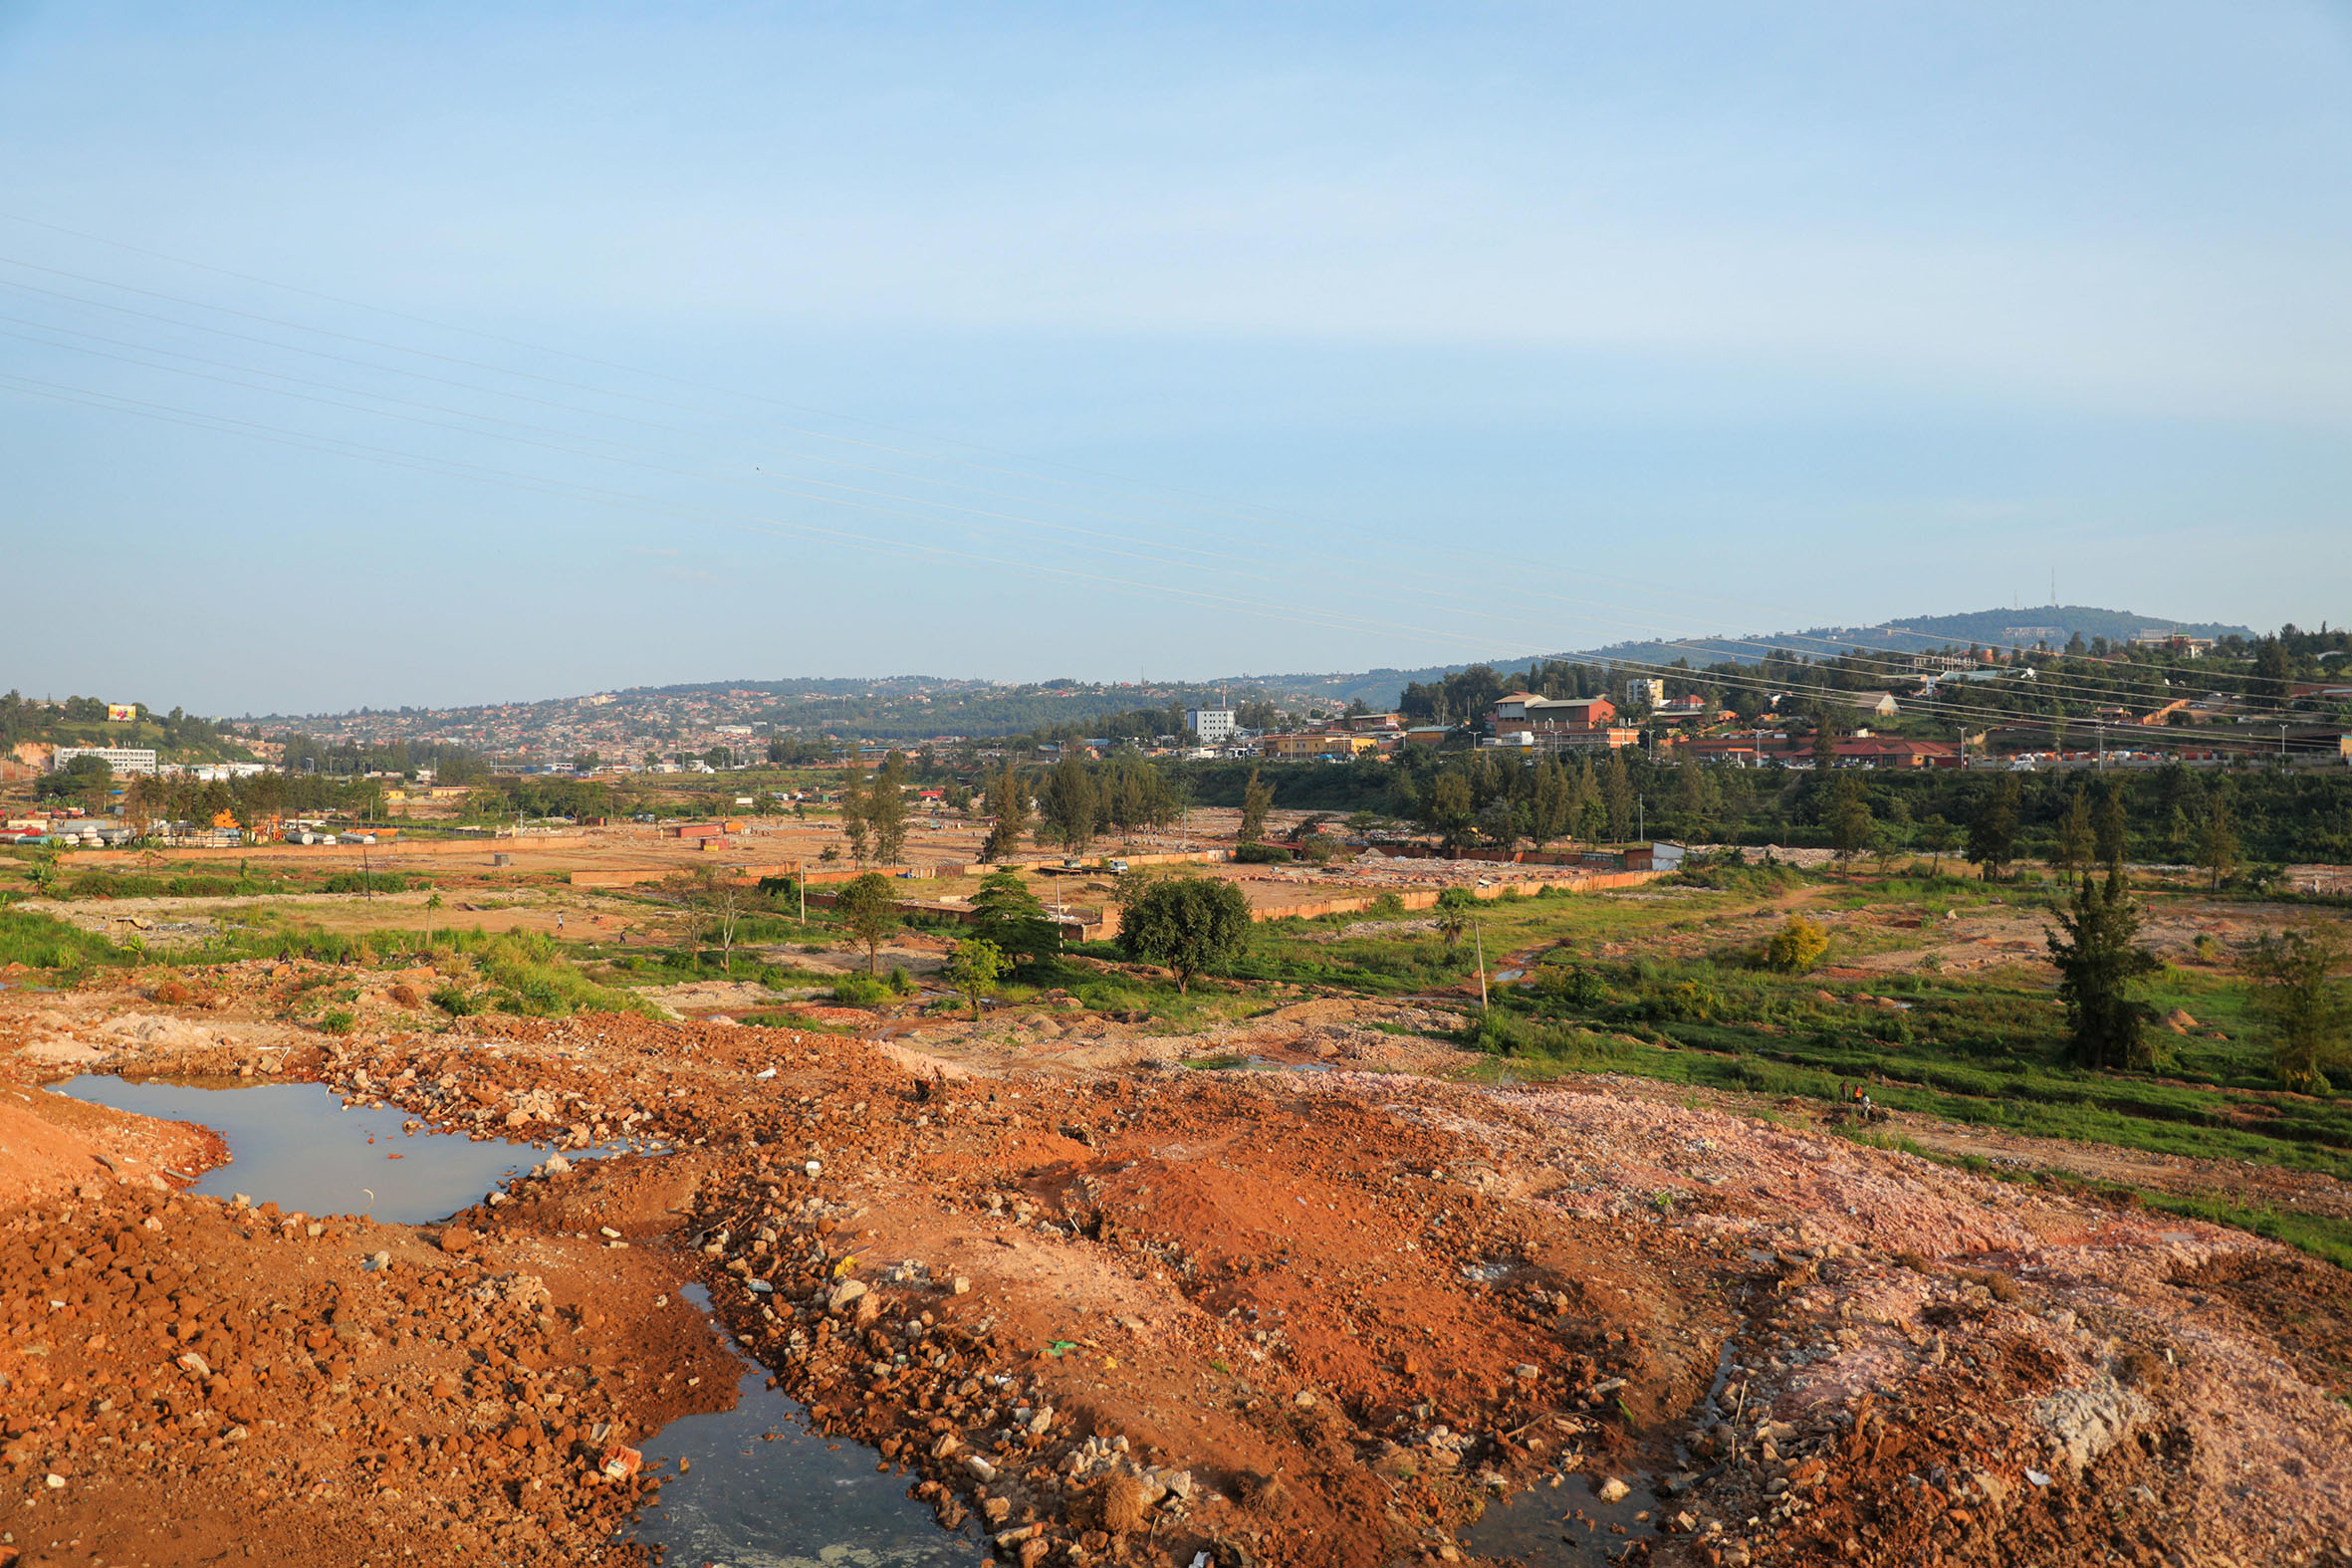 A landscape view of former Gikondo industrial park after demolishing properties to conserve wetlands in Kigali in 2020. Under the Kigali City Wetland Master Plan, 3,888 hectares are reserved for conservation. According to the new study, the city has about 37 interconnected wetlands with a total area of about 9,160 hectares. 